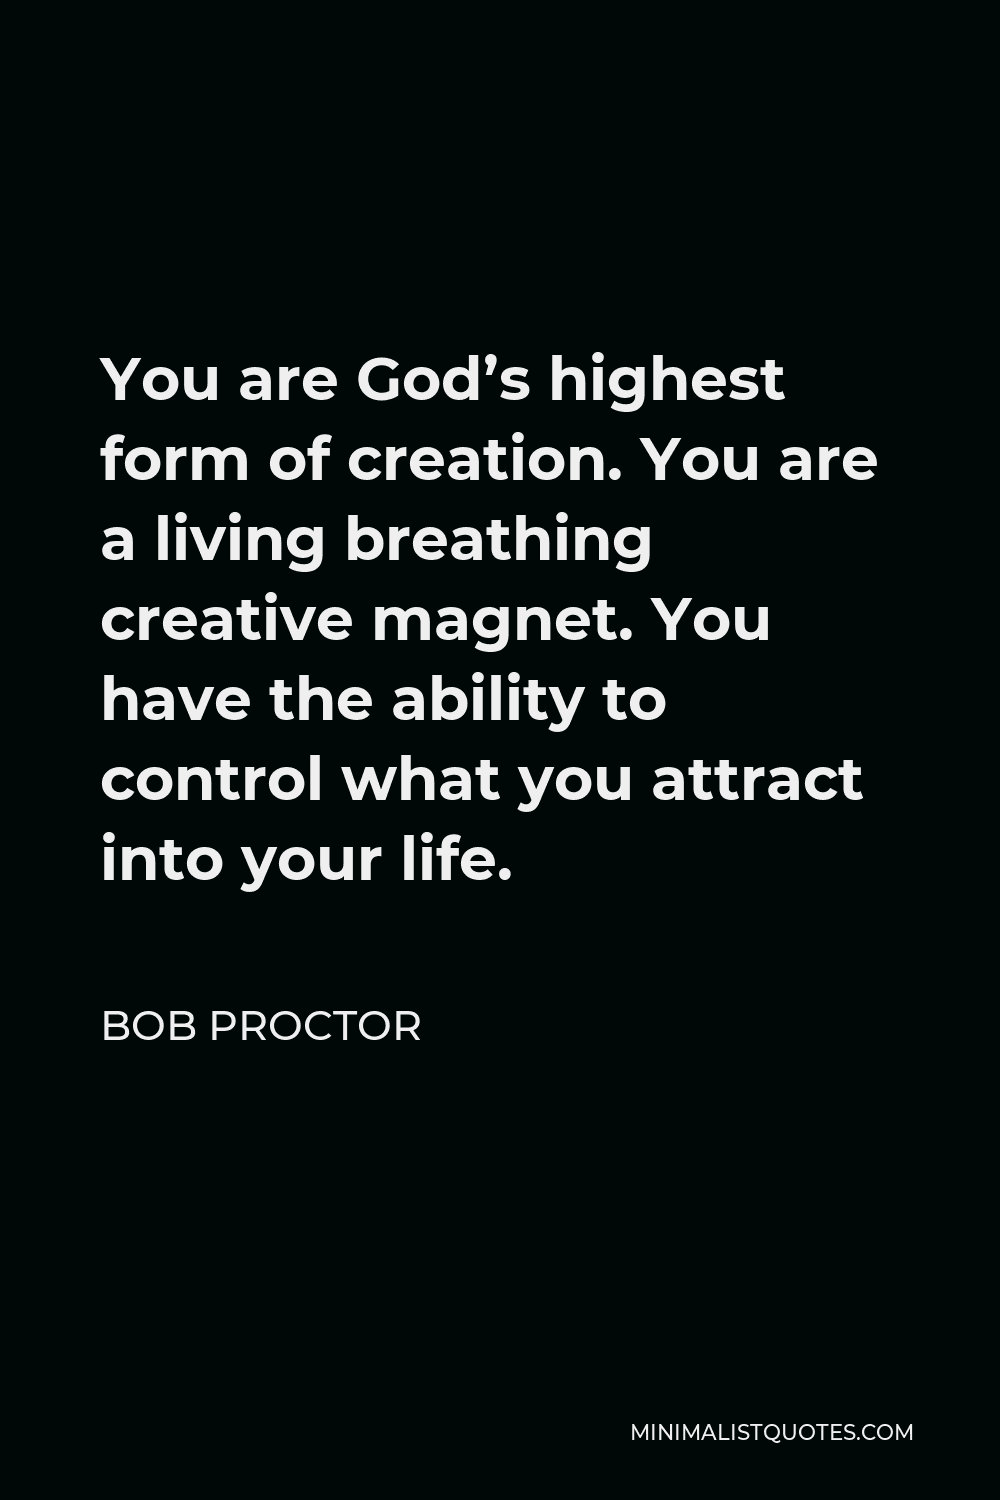 Bob Proctor Quote - You are God’s highest form of creation. You are a living breathing creative magnet. You have the ability to control what you attract into your life.